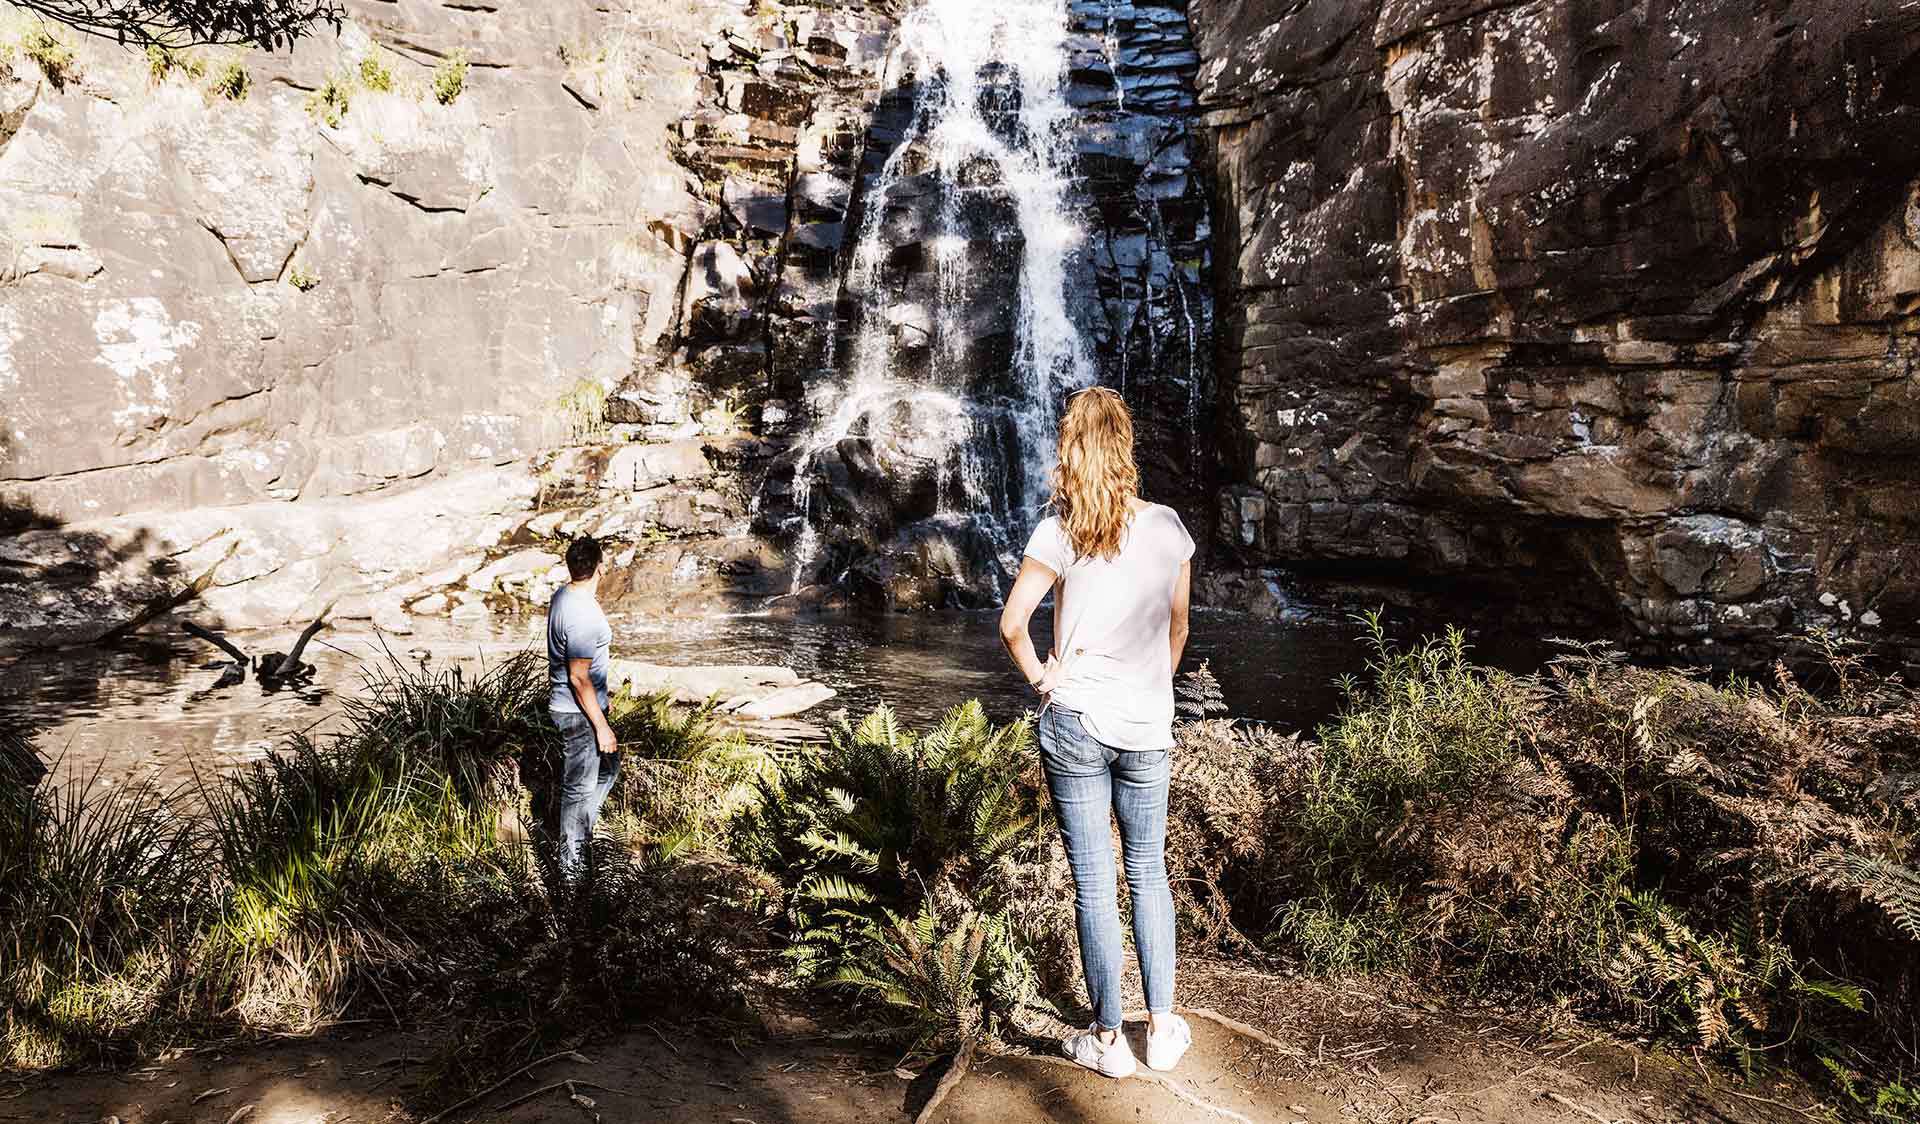 A couple stand and admire Sheoak Falls near Lorne in the Great Otway National Park.